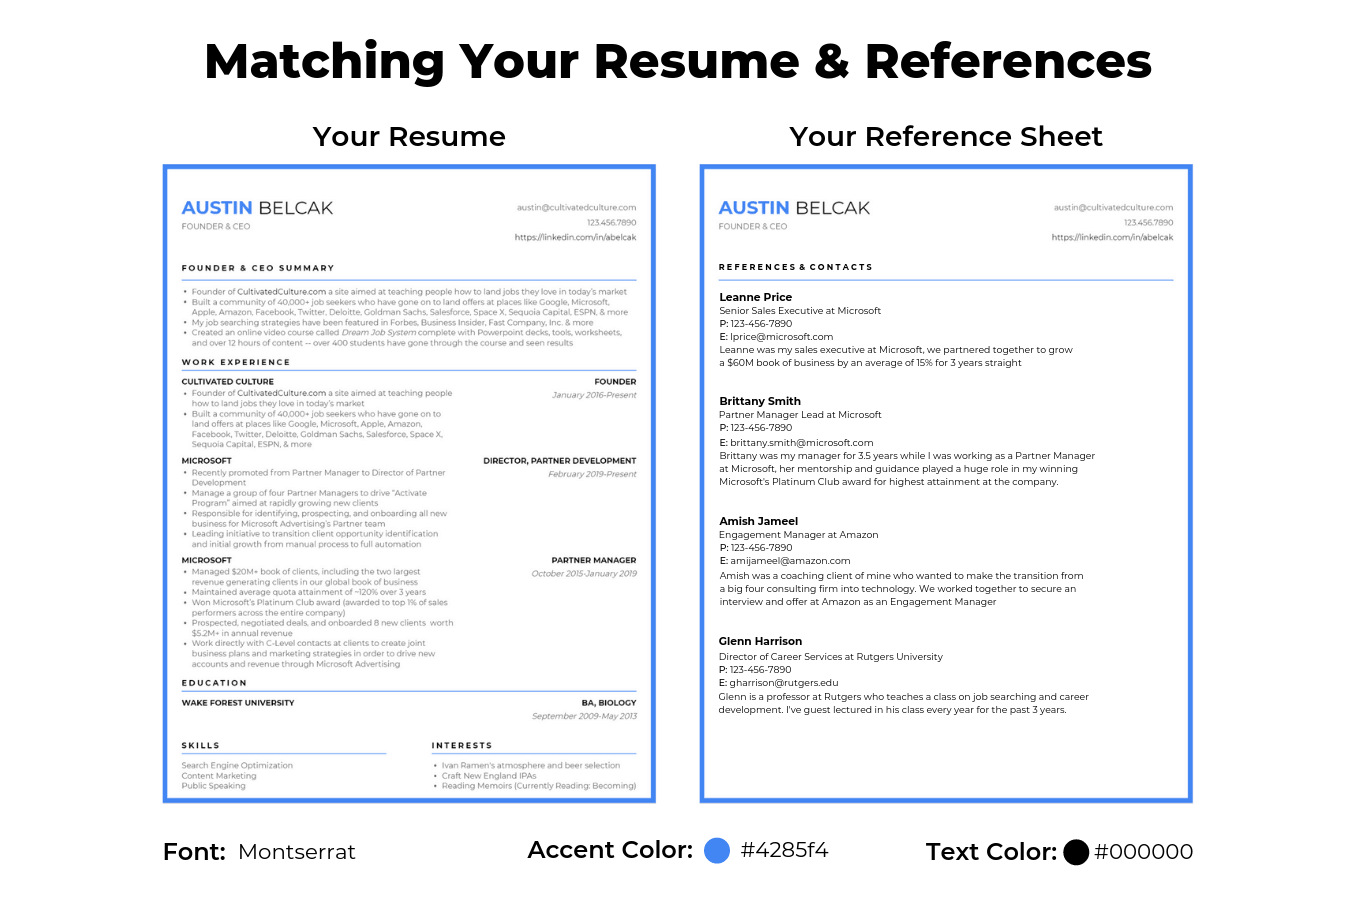 Example of a resume and resume references sheet with matching formats and colors